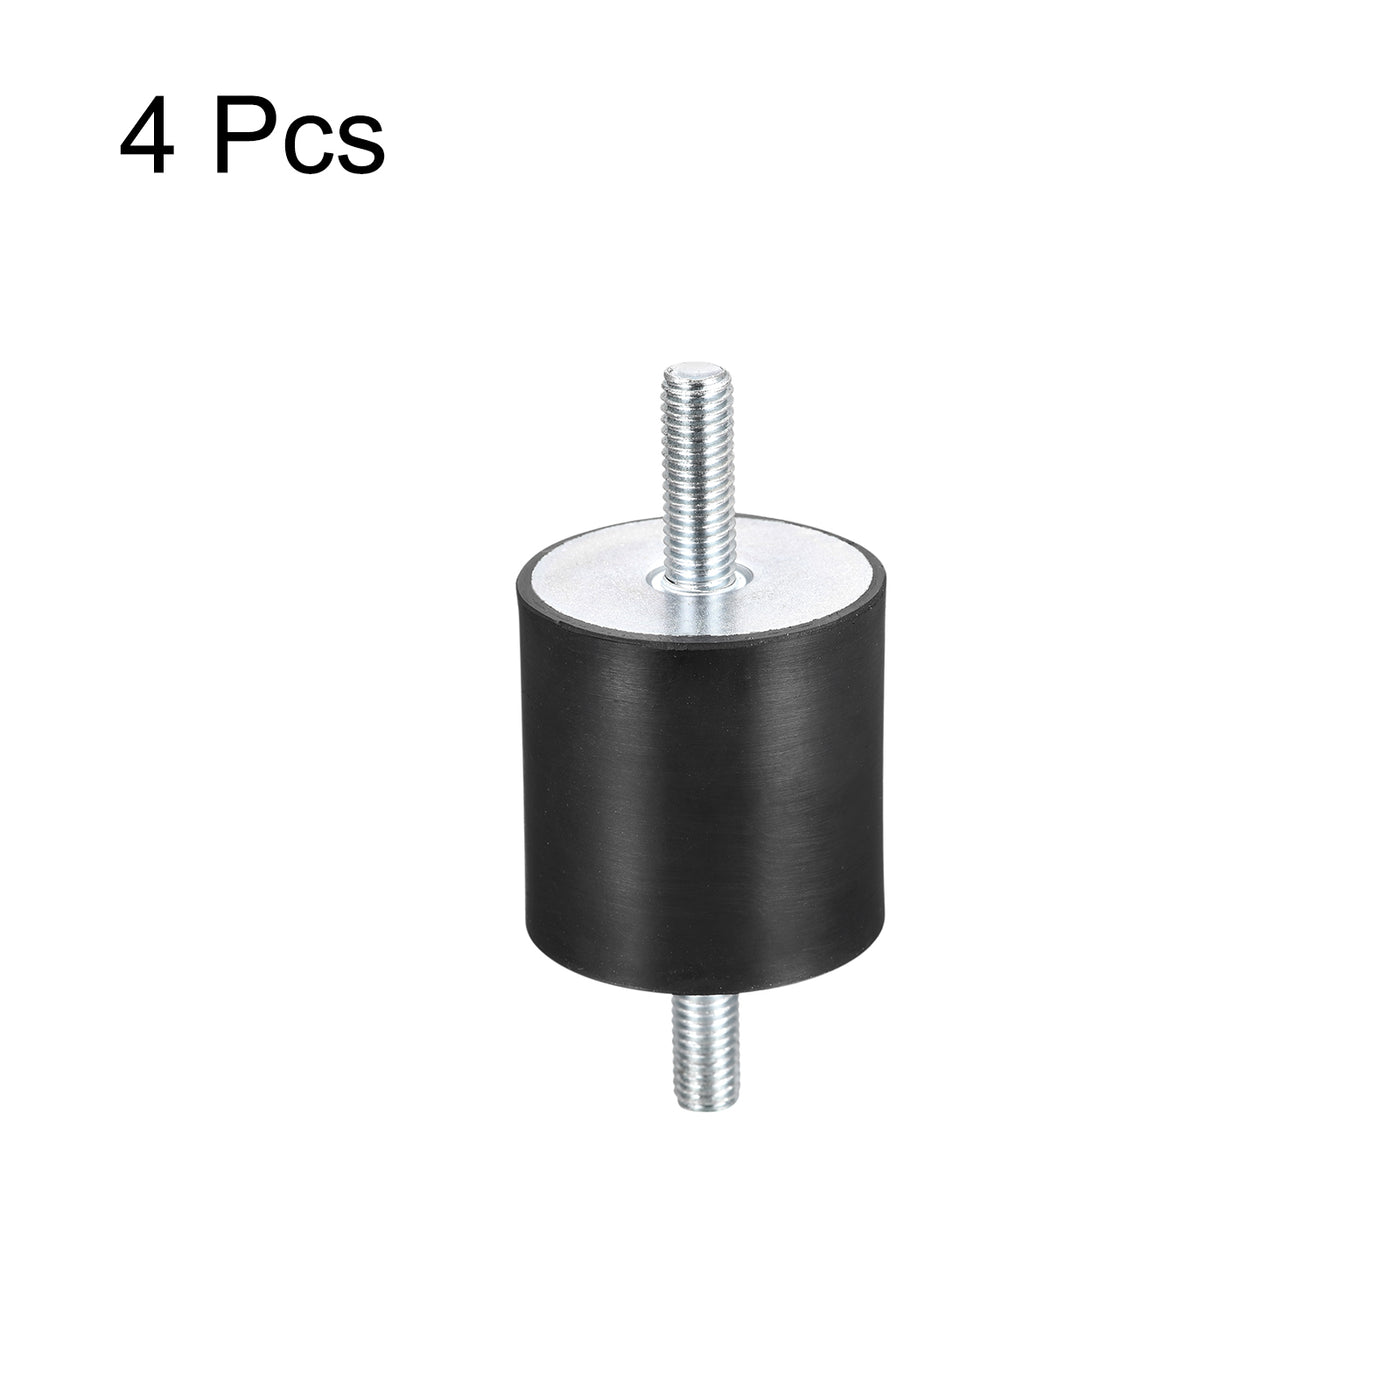 uxcell Uxcell Rubber Mounts 4pcs M8x23mm Male Vibration Isolator Shock Absorber D40mmxH40mm